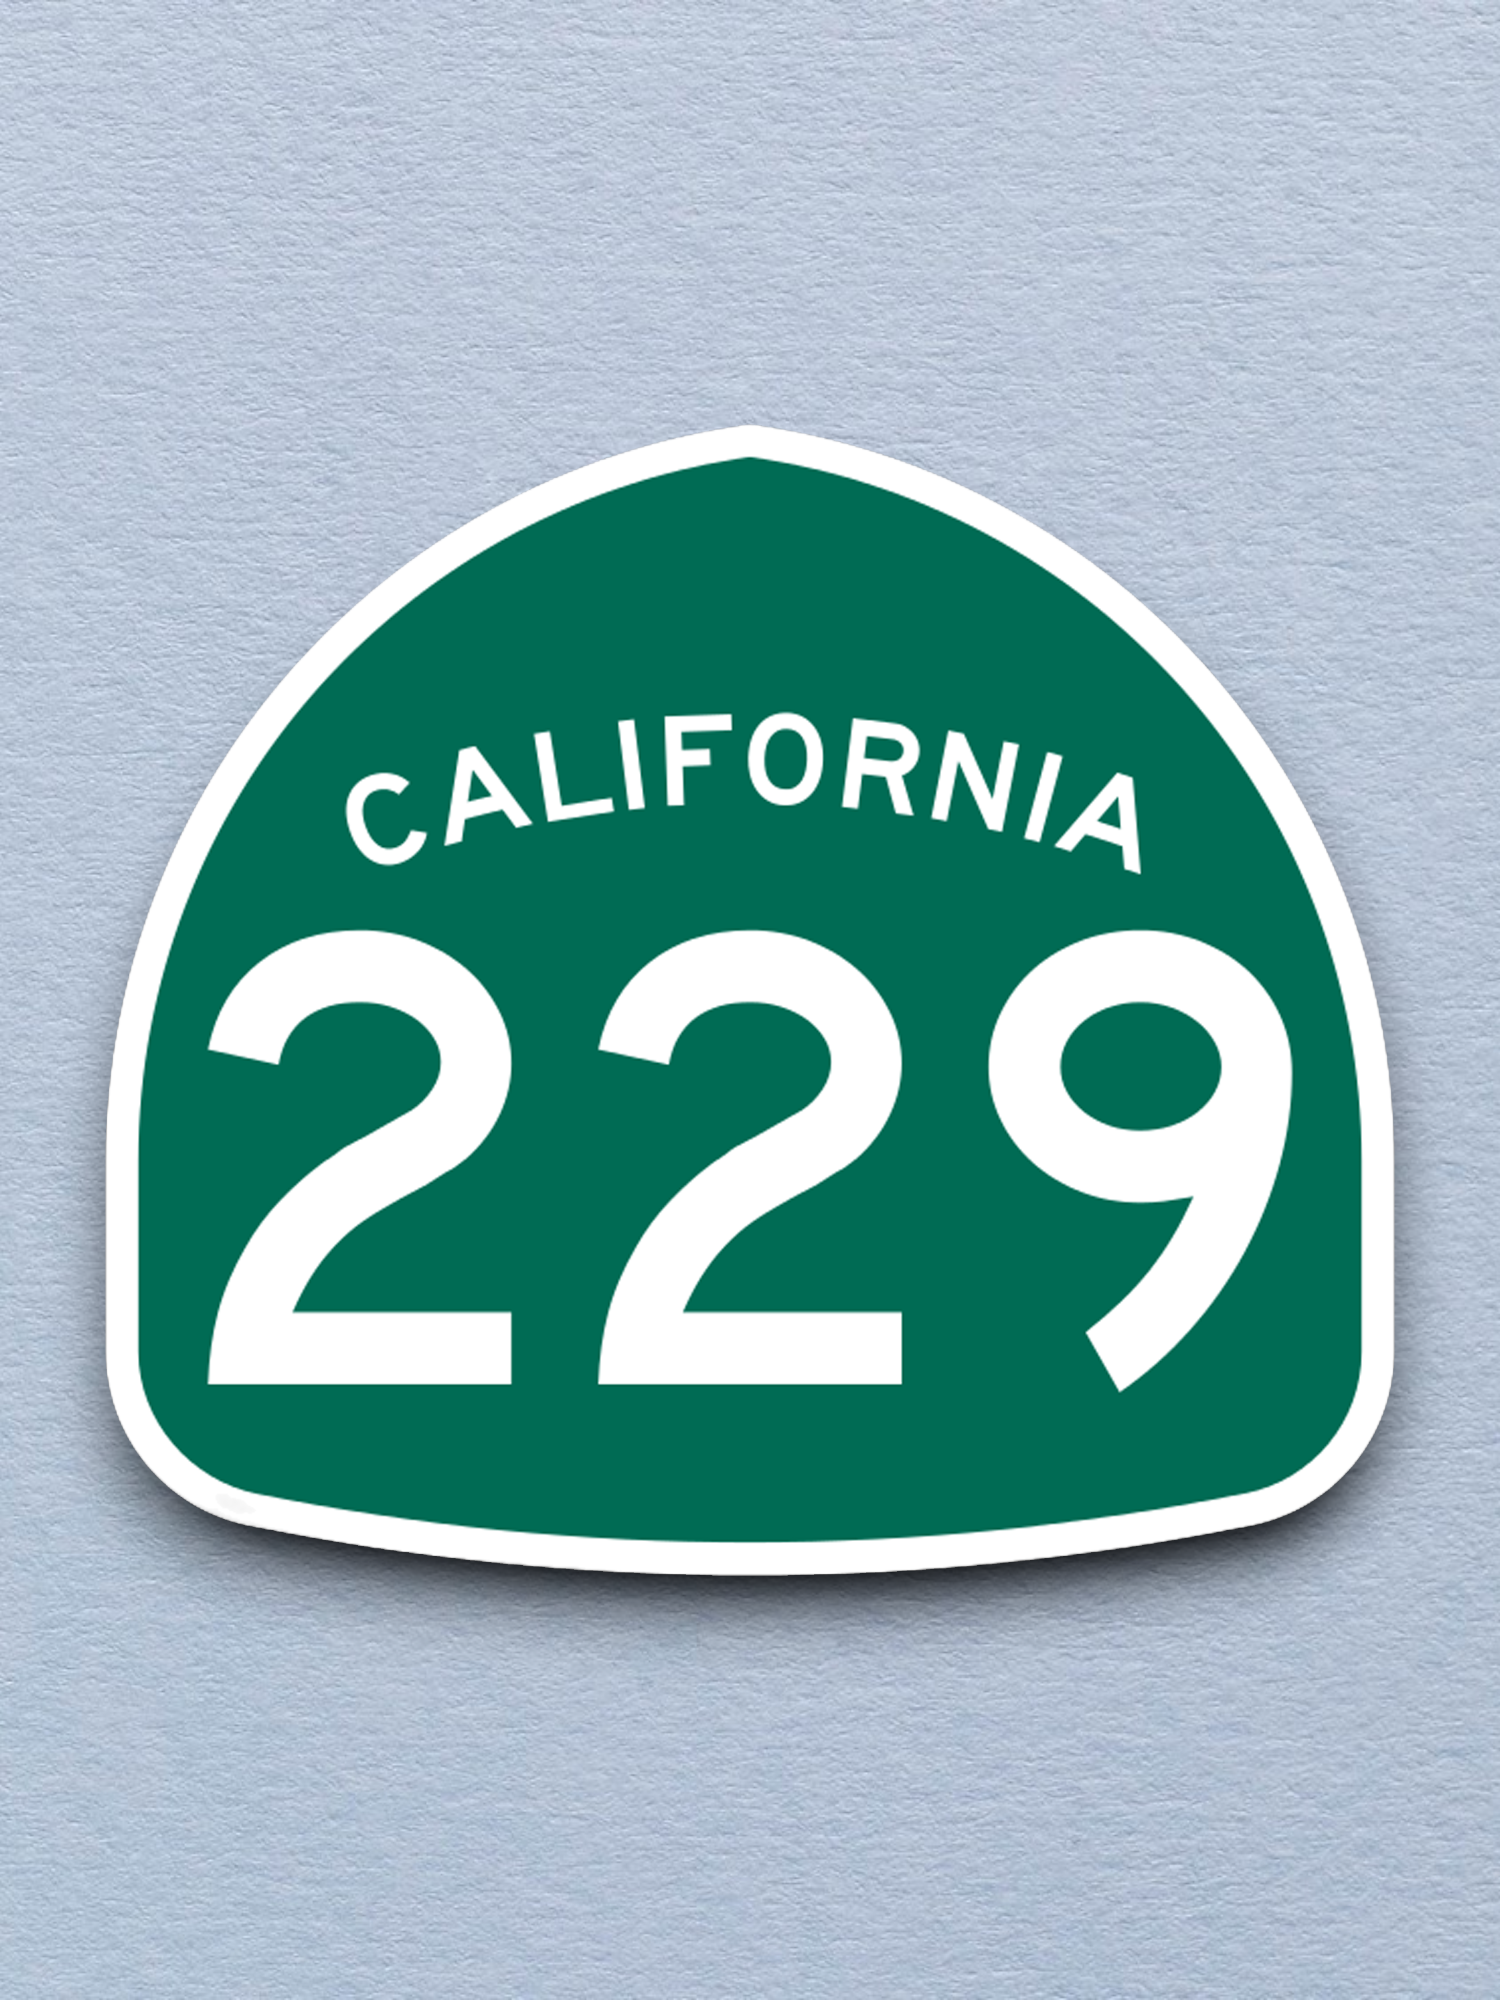 California State Route 229 Road Sign Sticker